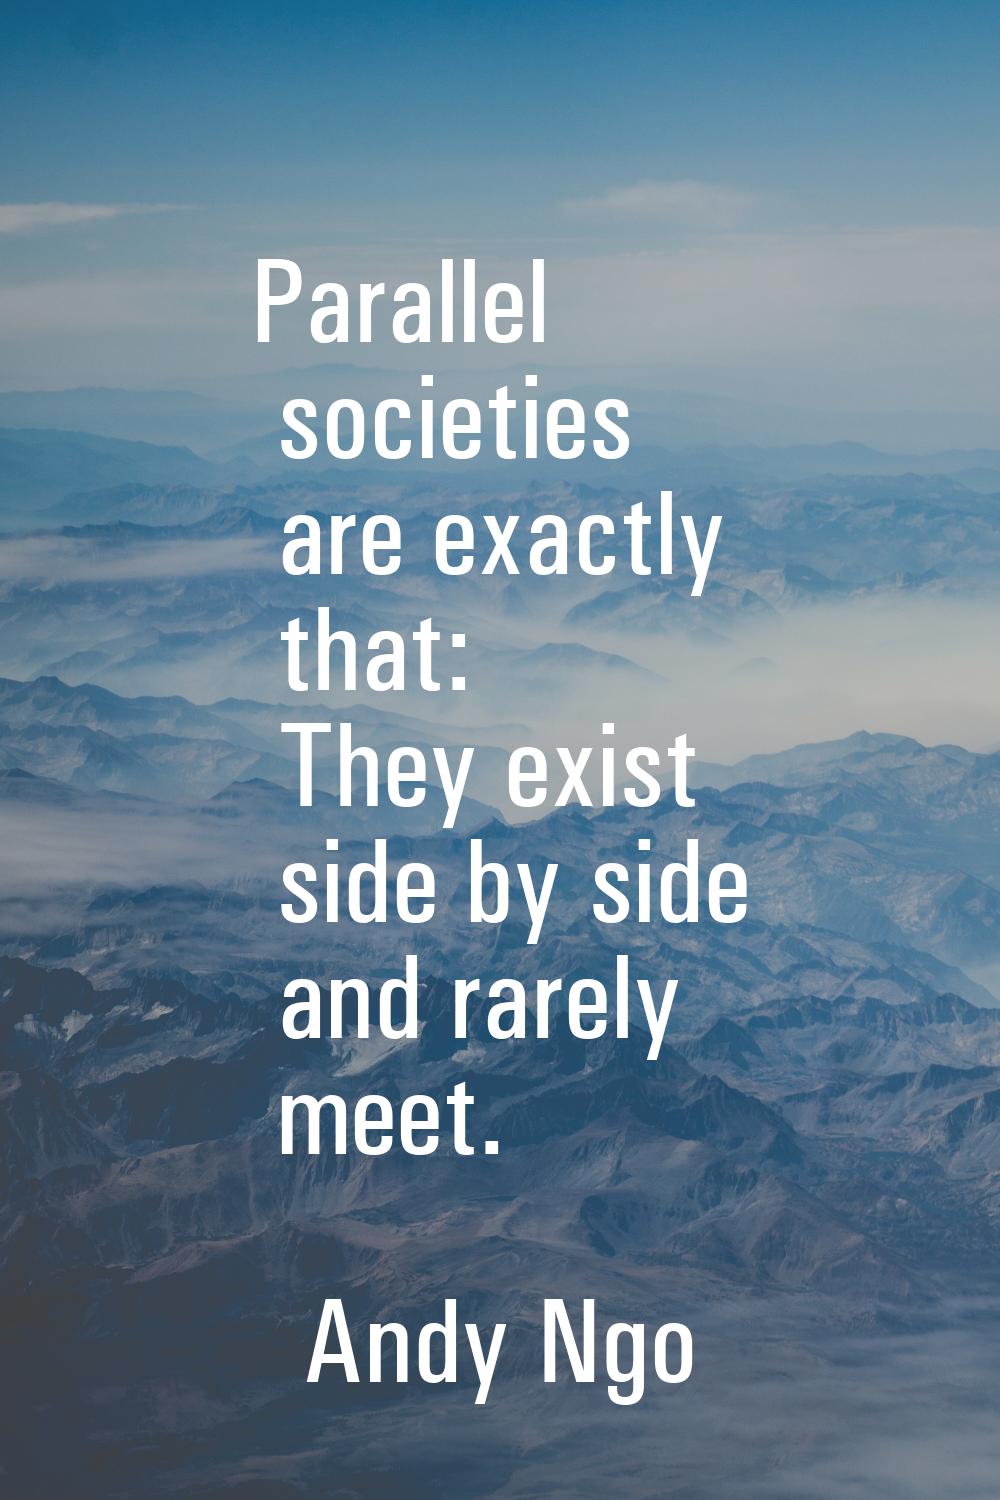 Parallel societies are exactly that: They exist side by side and rarely meet.